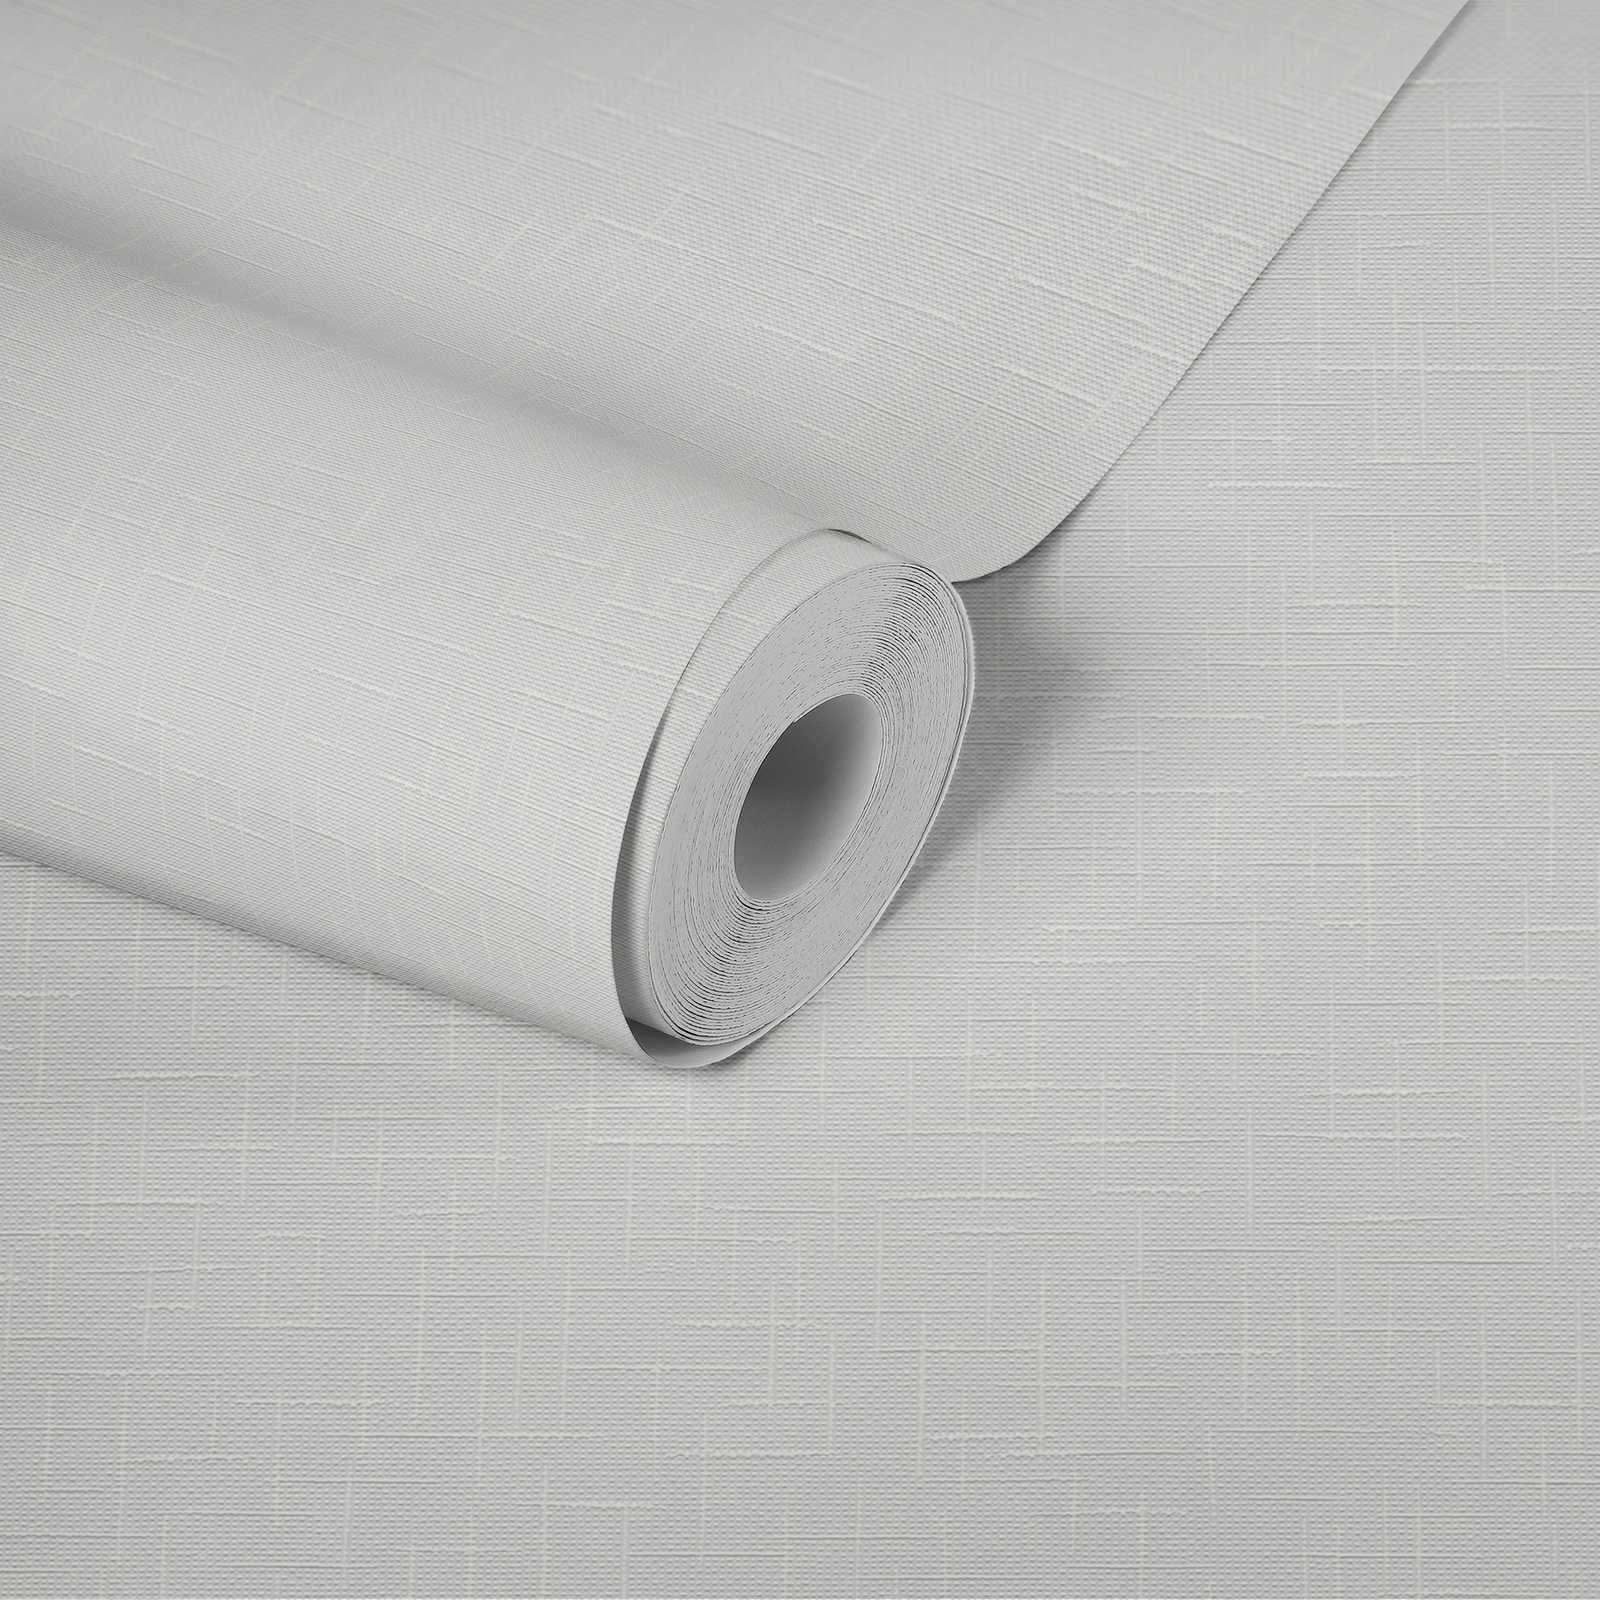             Paintable non-woven wallpaper with dotted structure - 25.00 m x 1.06 m
        